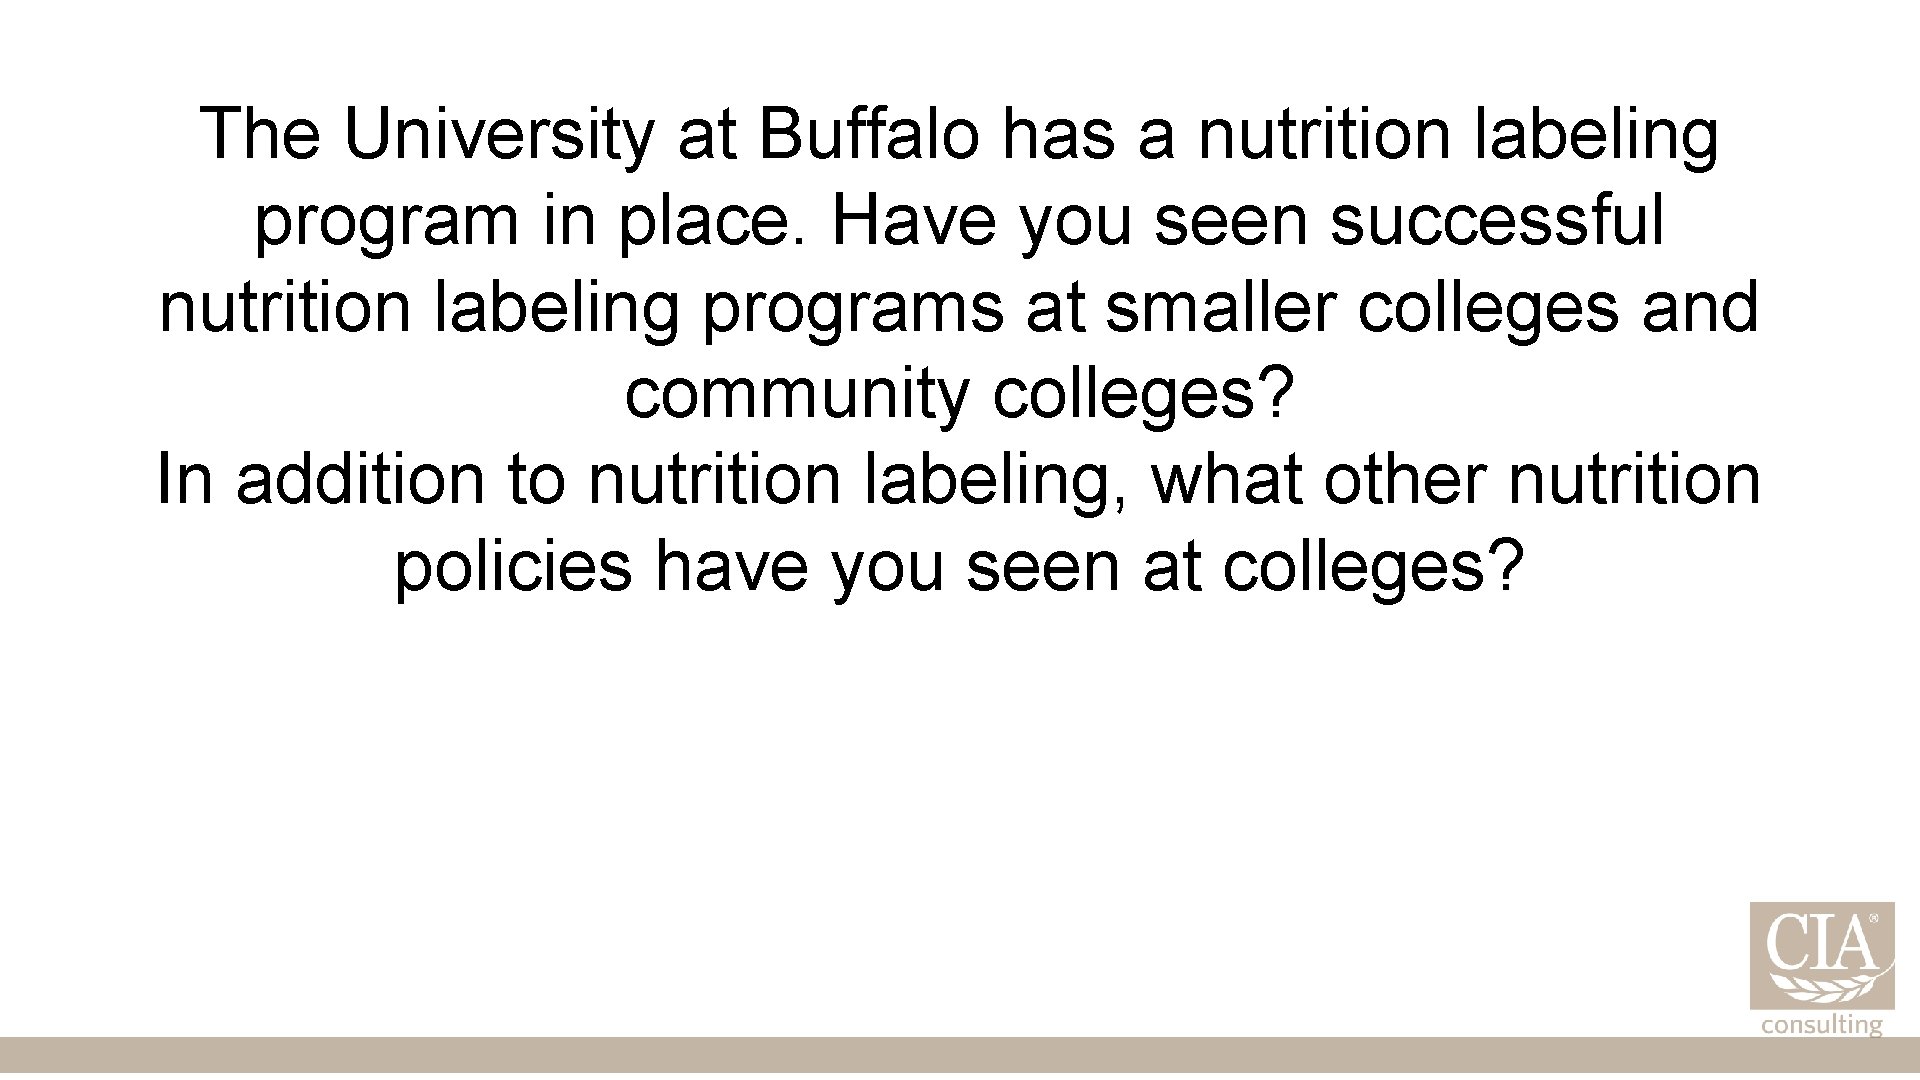 The University at Buffalo has a nutrition labeling program in place. Have you seen